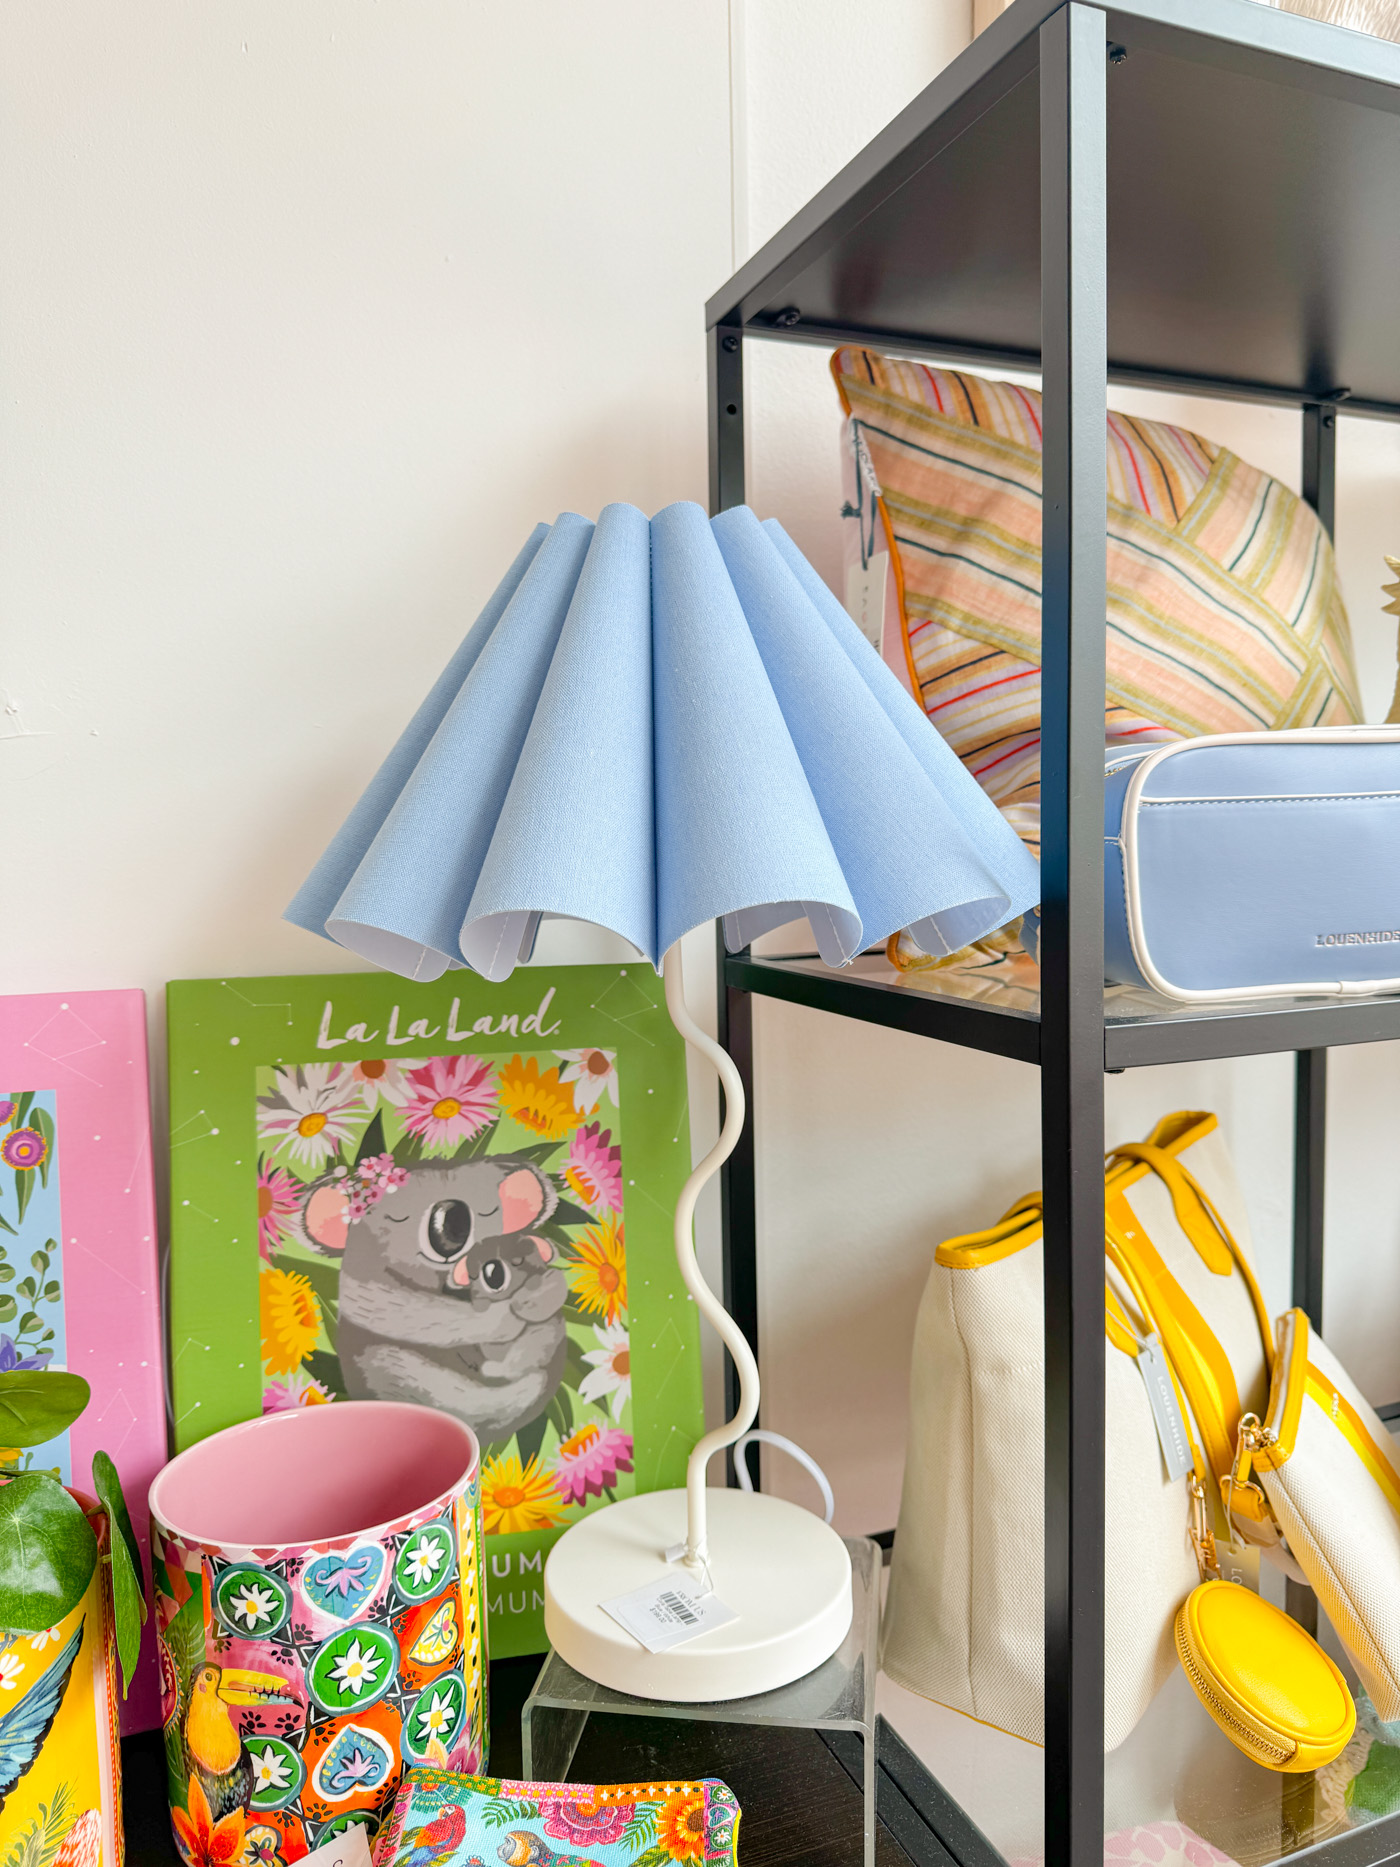 Lilly Cooper Homewares and Gifts - Manuka, Canberra